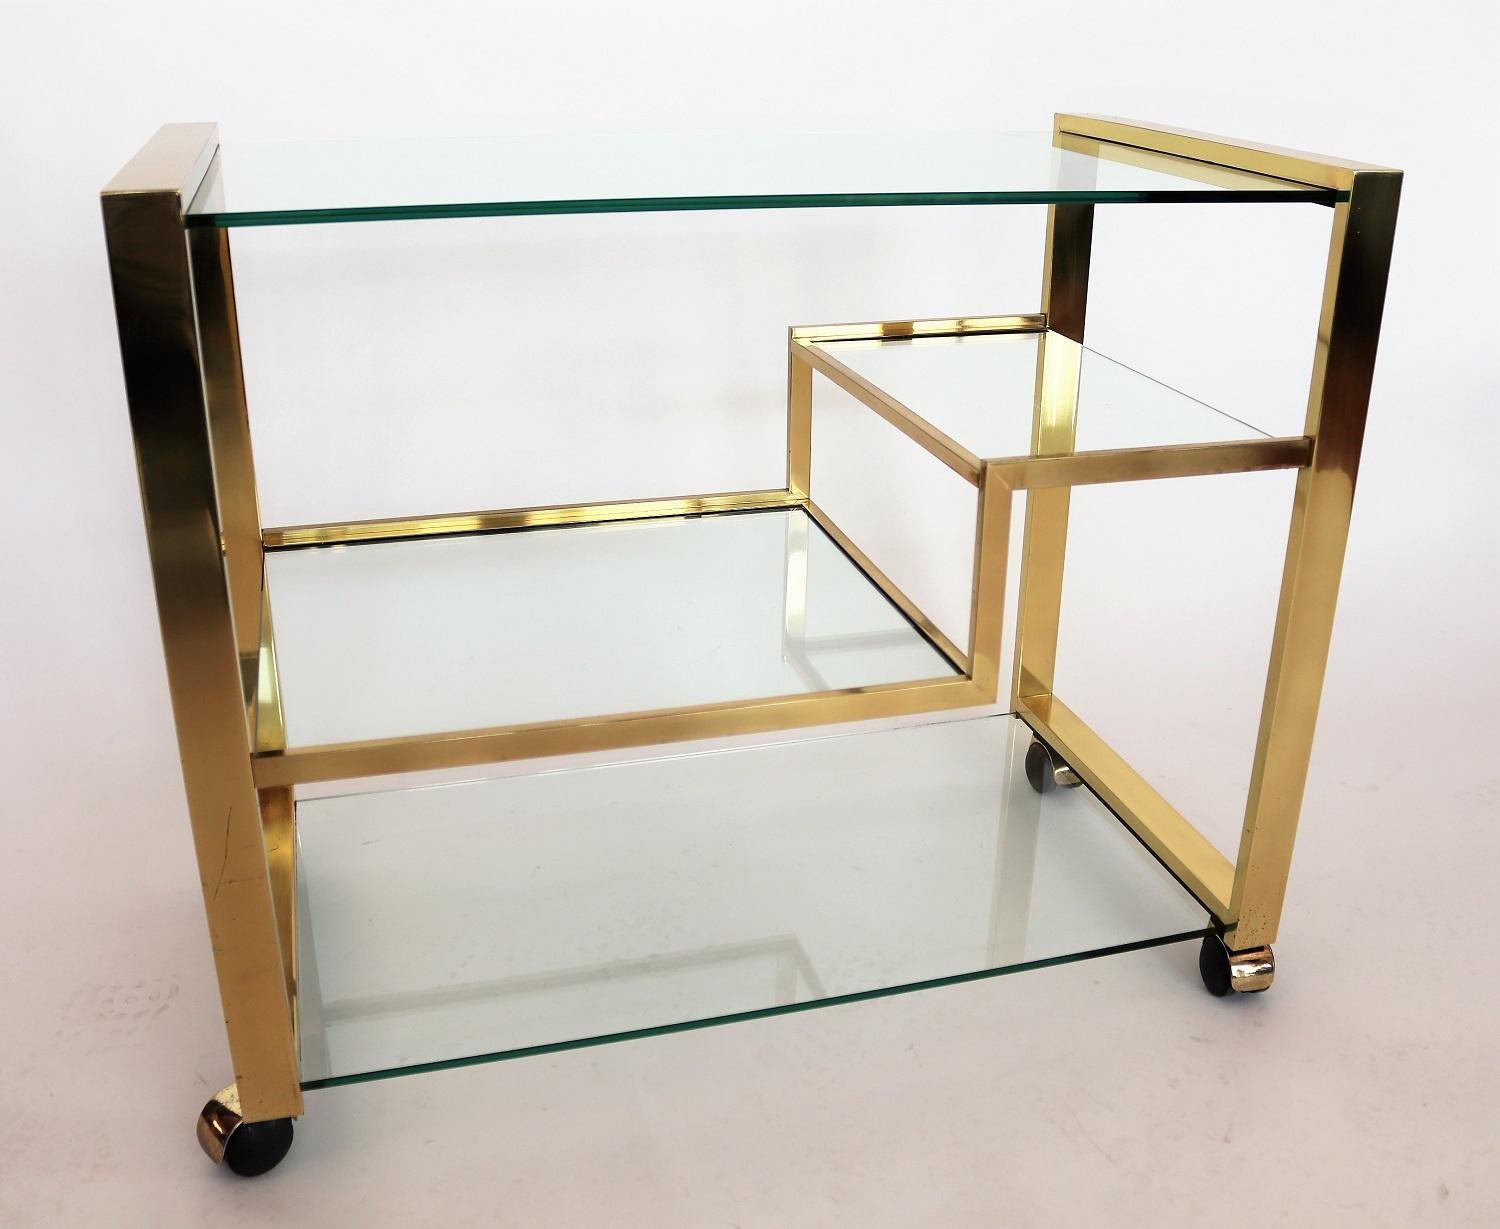 Polished Italian Brass and Glass Bar Trolley or Cart in the Hollywood Regency Style, 1970